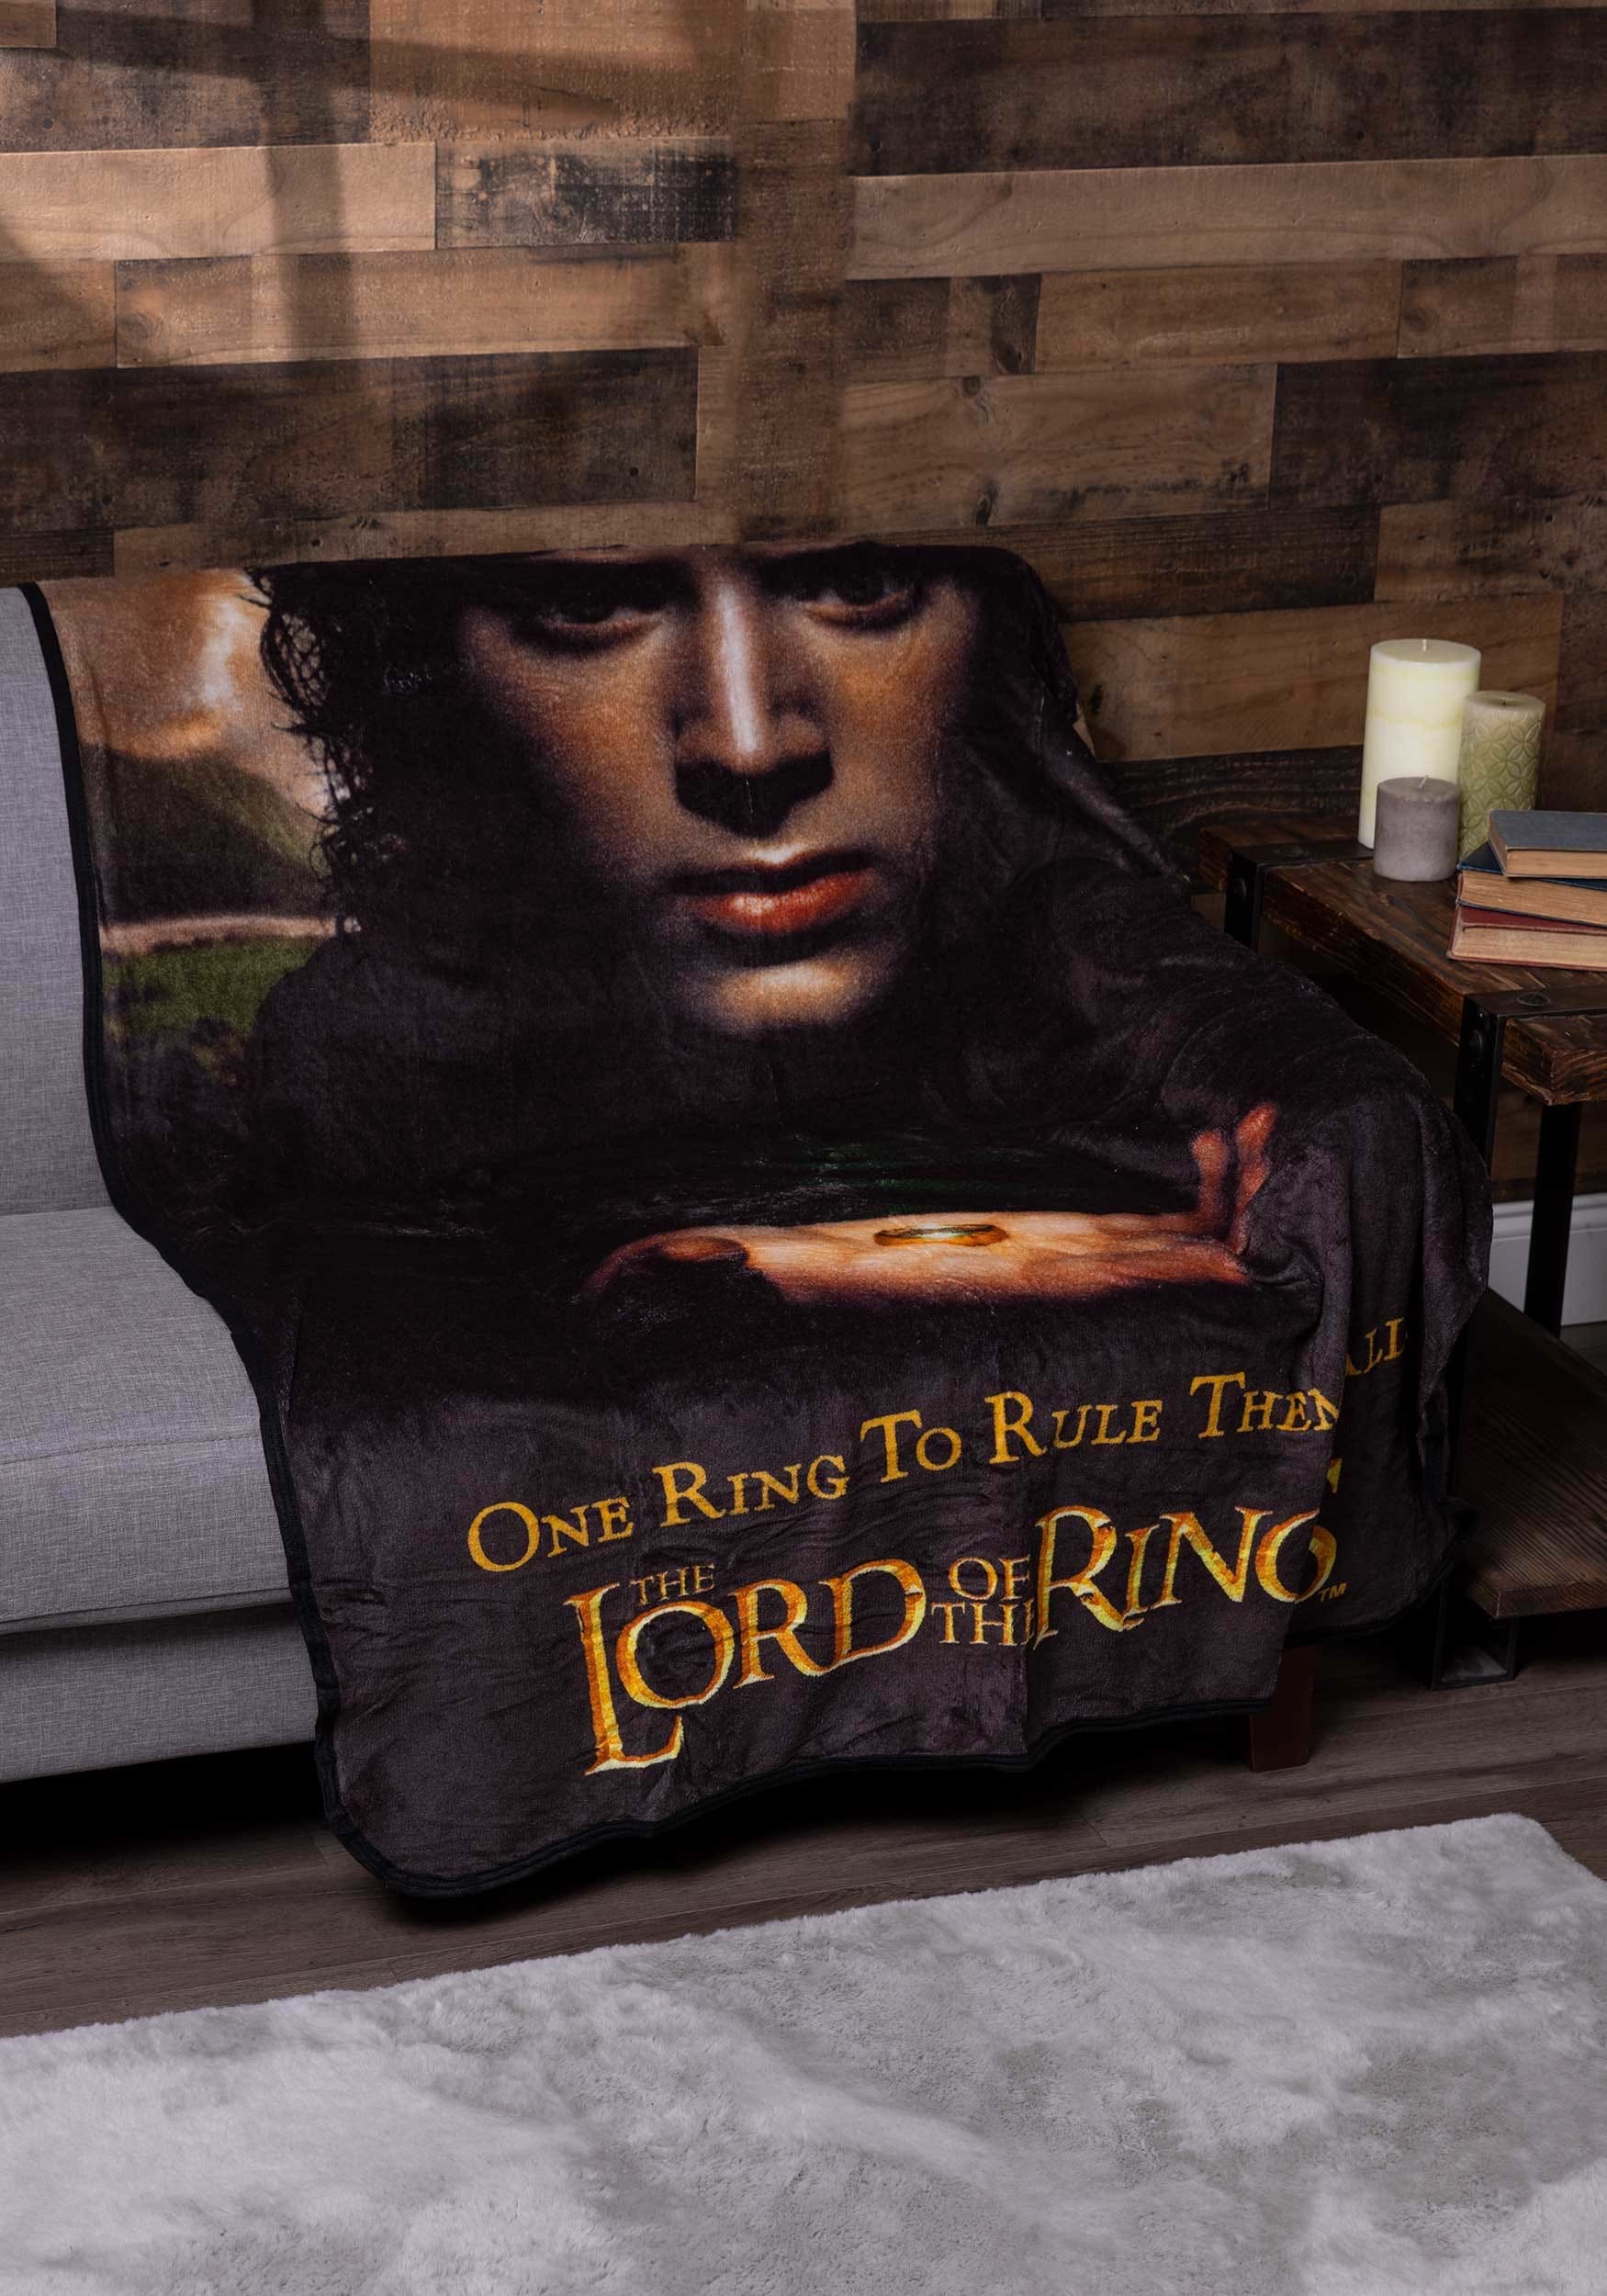 Lord of the Rings One Ring Micro Raschel Comfy Throw